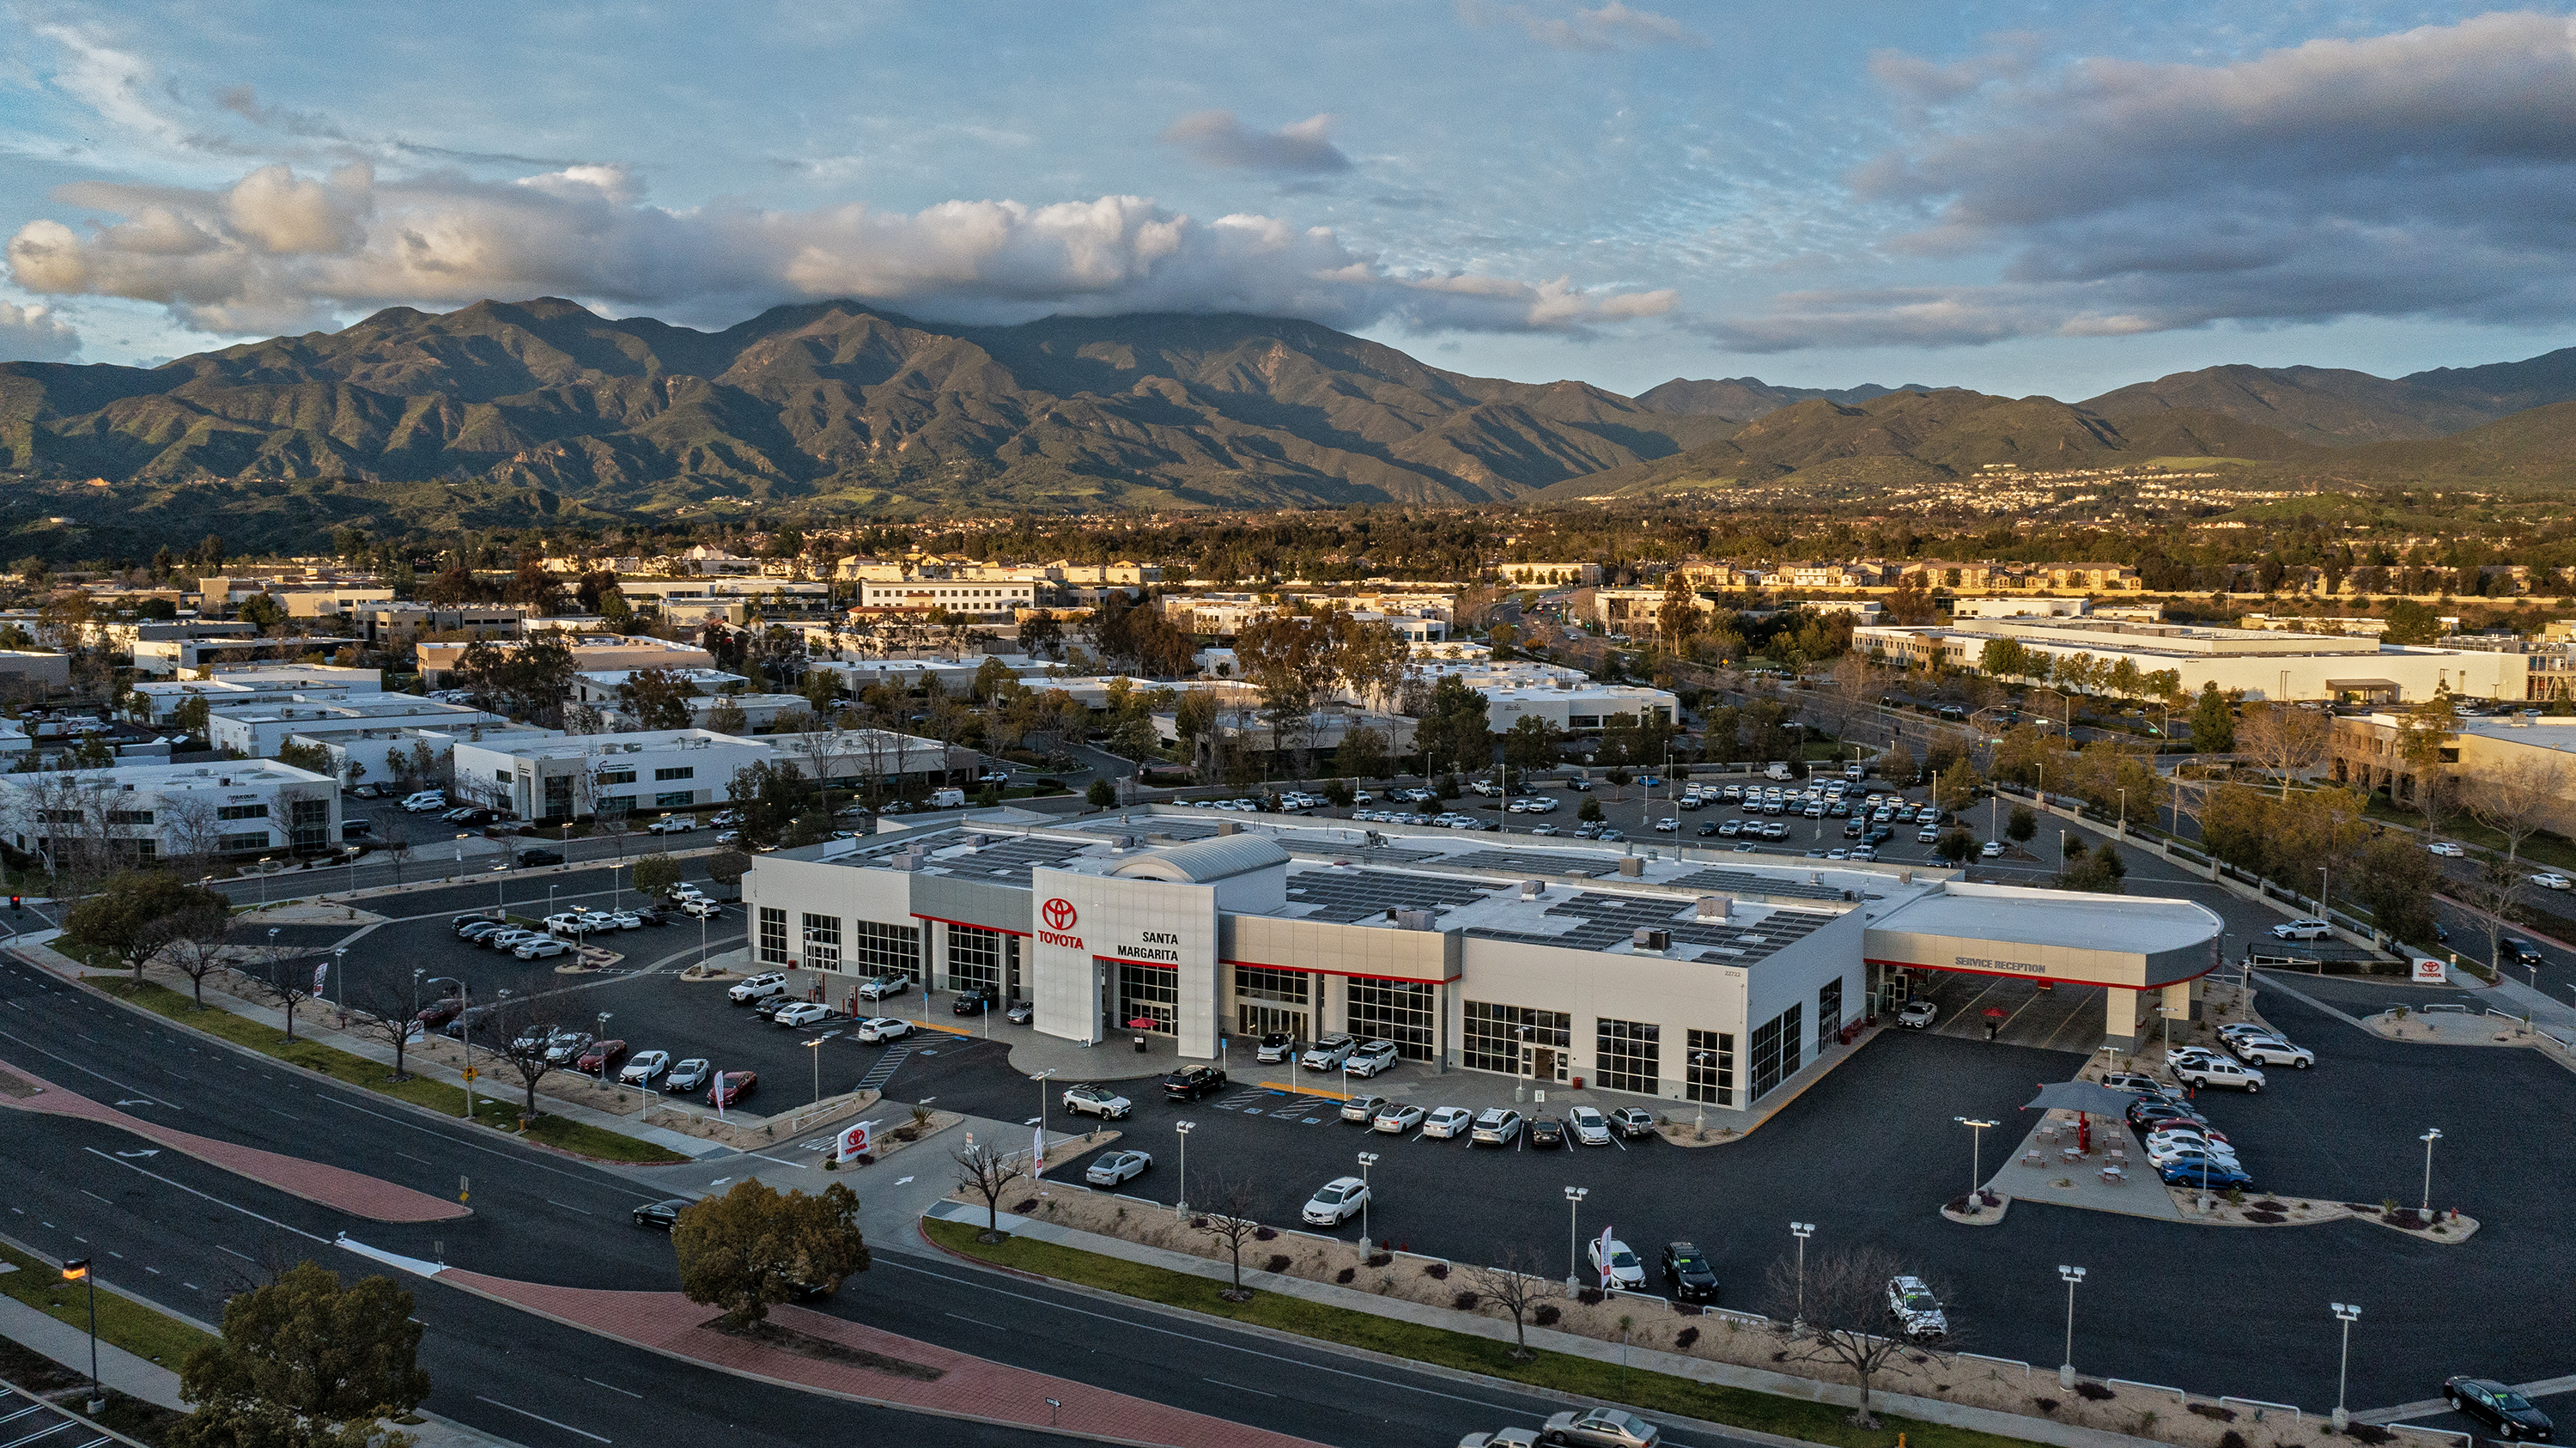 Drone shot of a Toyota dealership in Rancho Santa Margarita, California, which has solar panels on the roof,